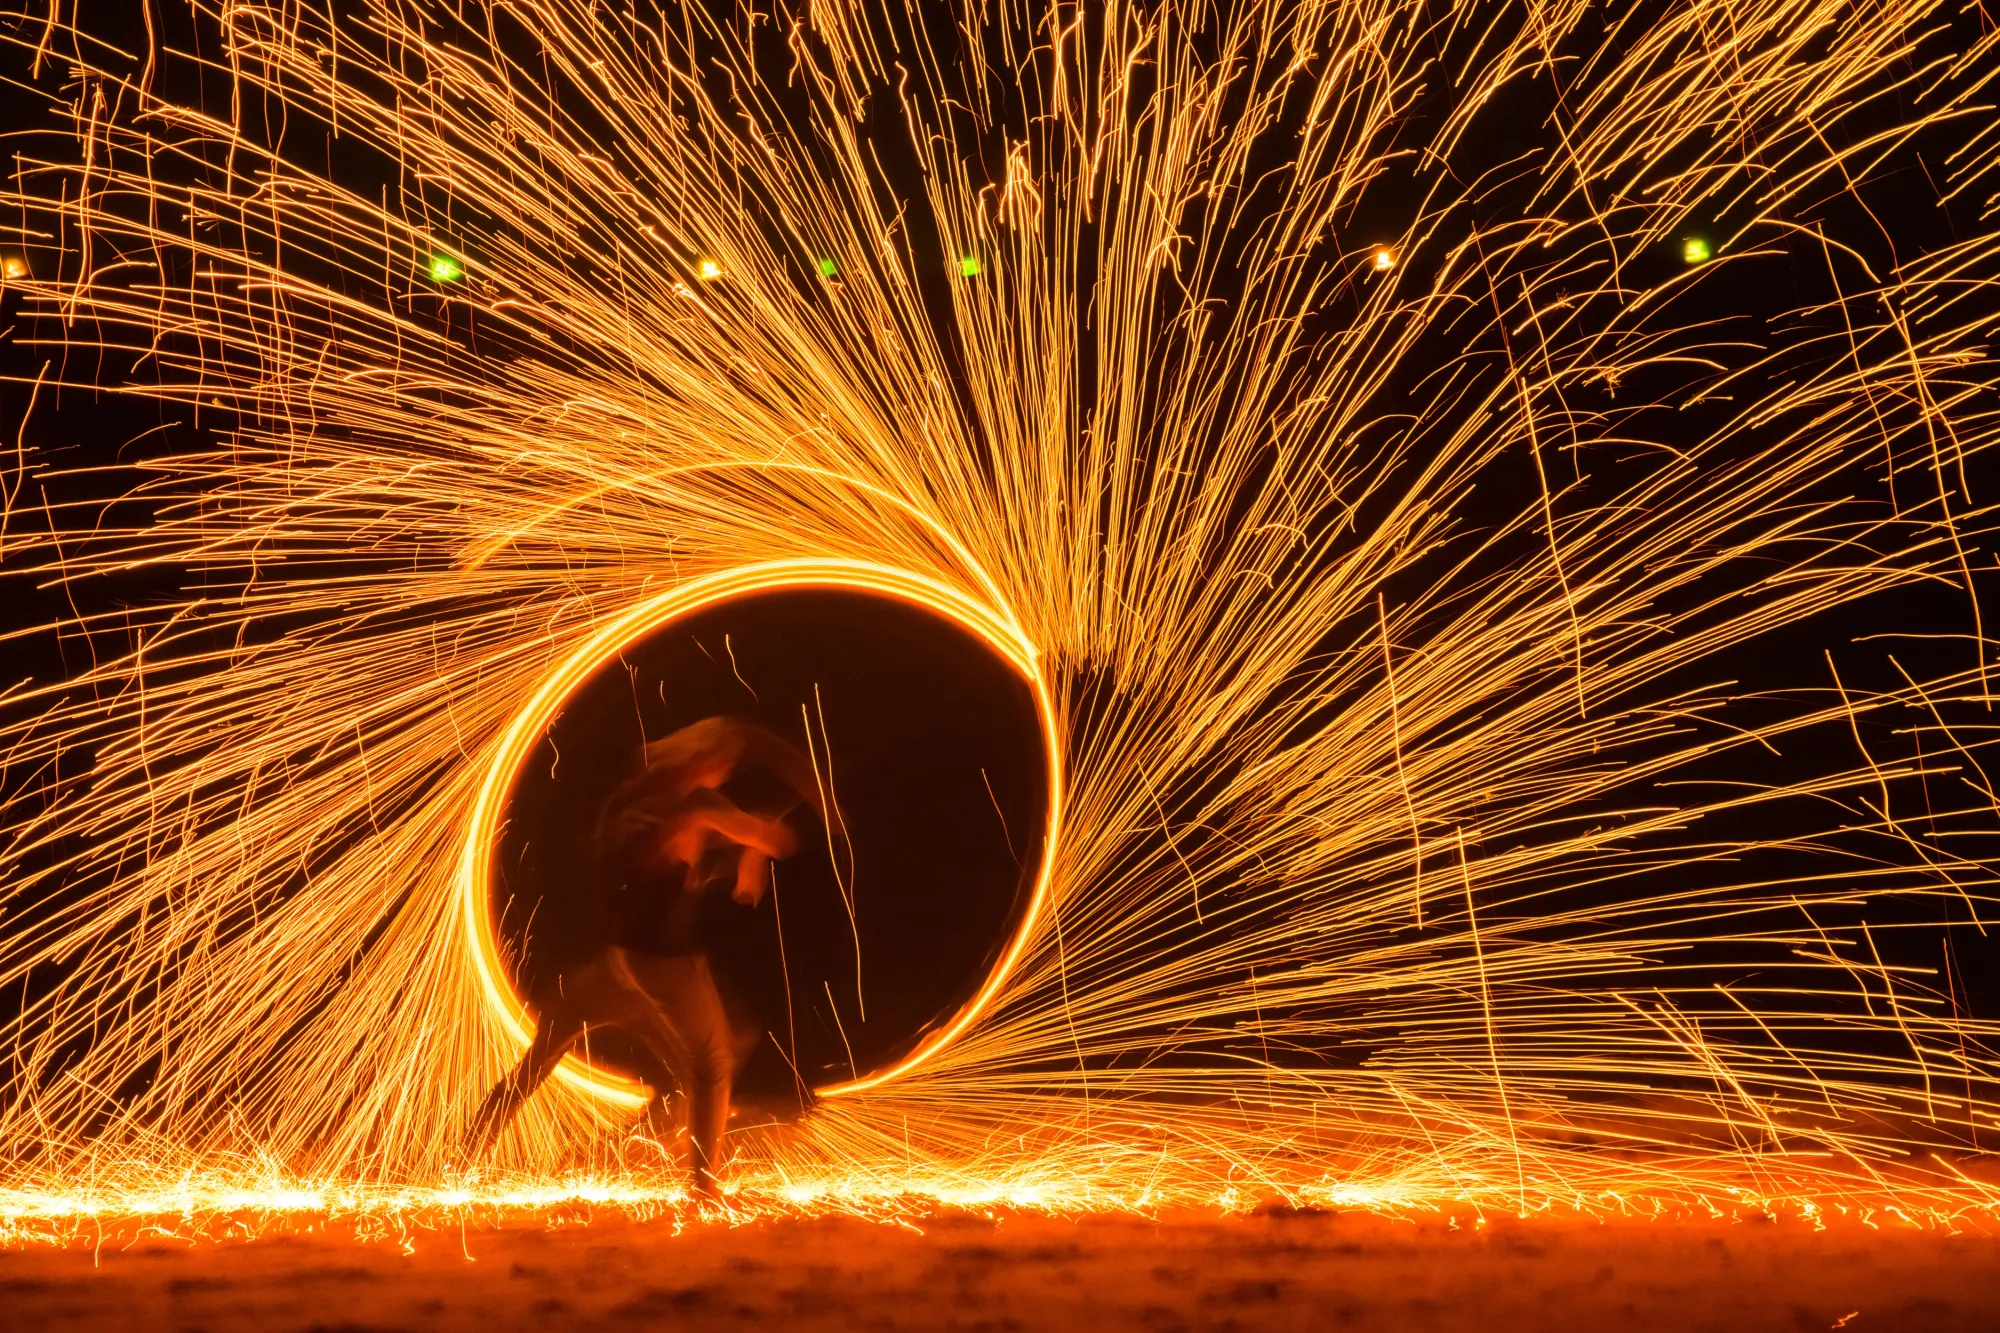 Image of a fireshow in Koh Lanta, Thailand